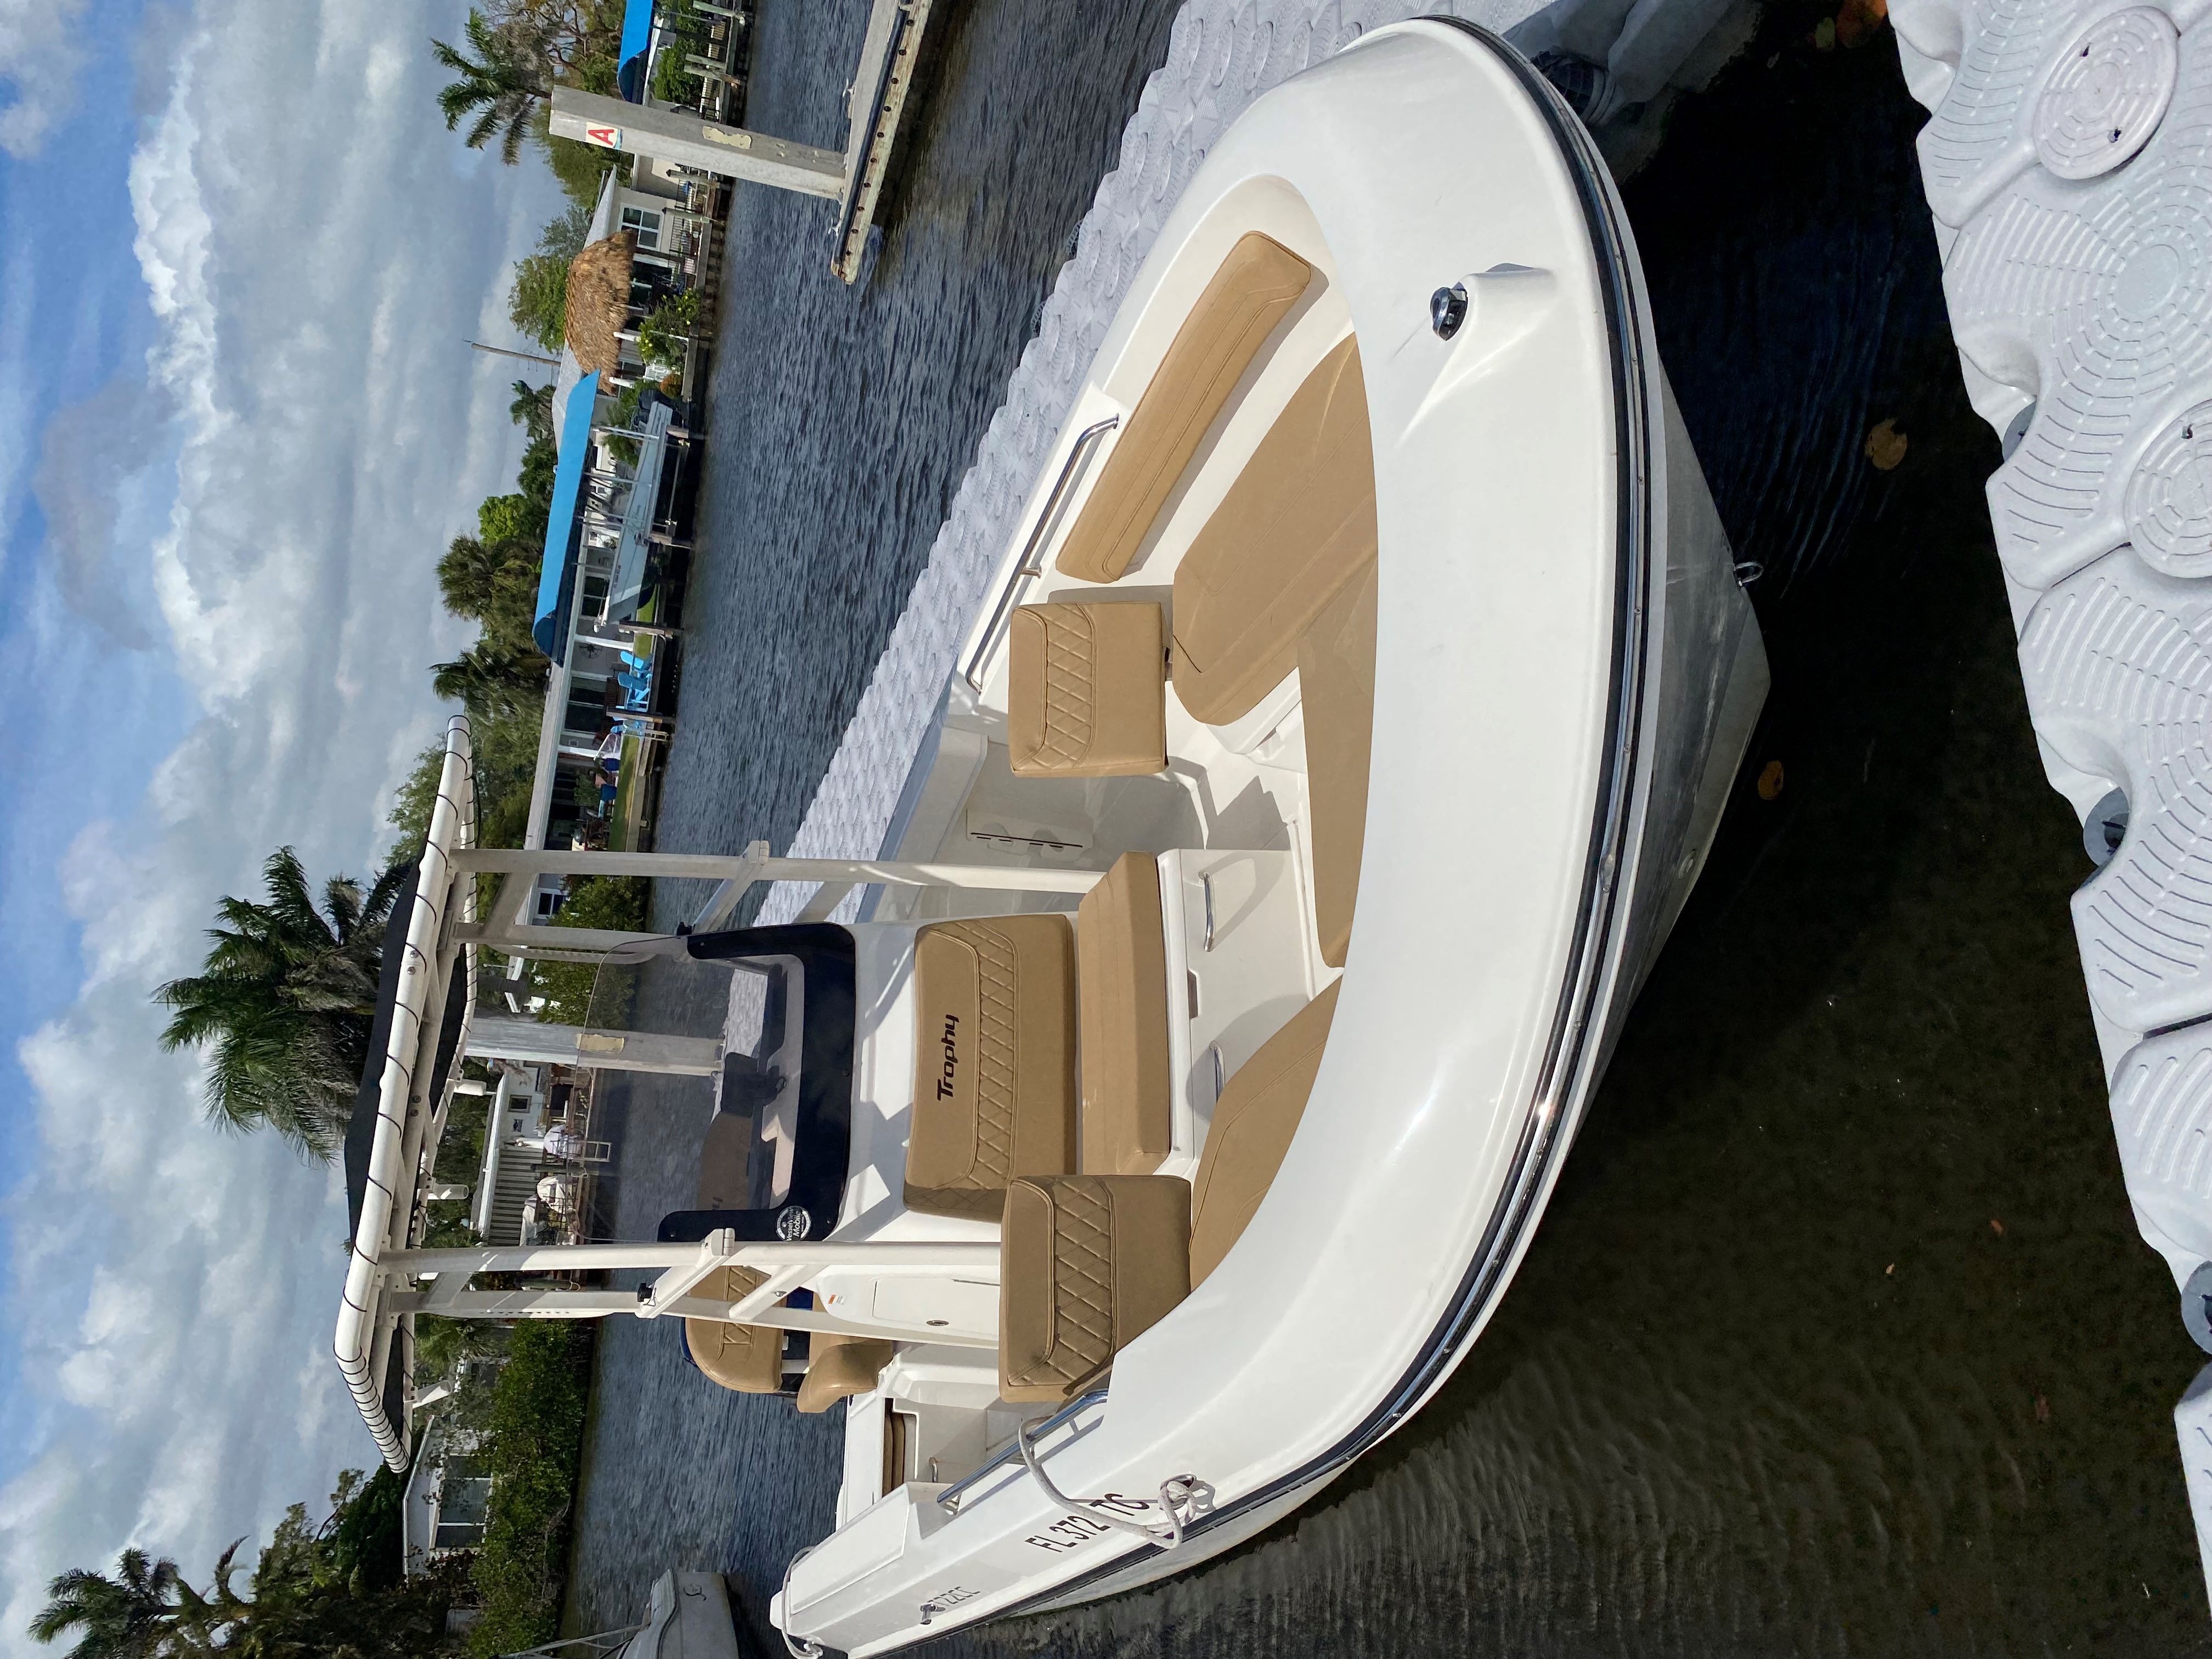 POWER TRIP (23FT Bayliner Trophy Center Console - 150 HP~Fishing)